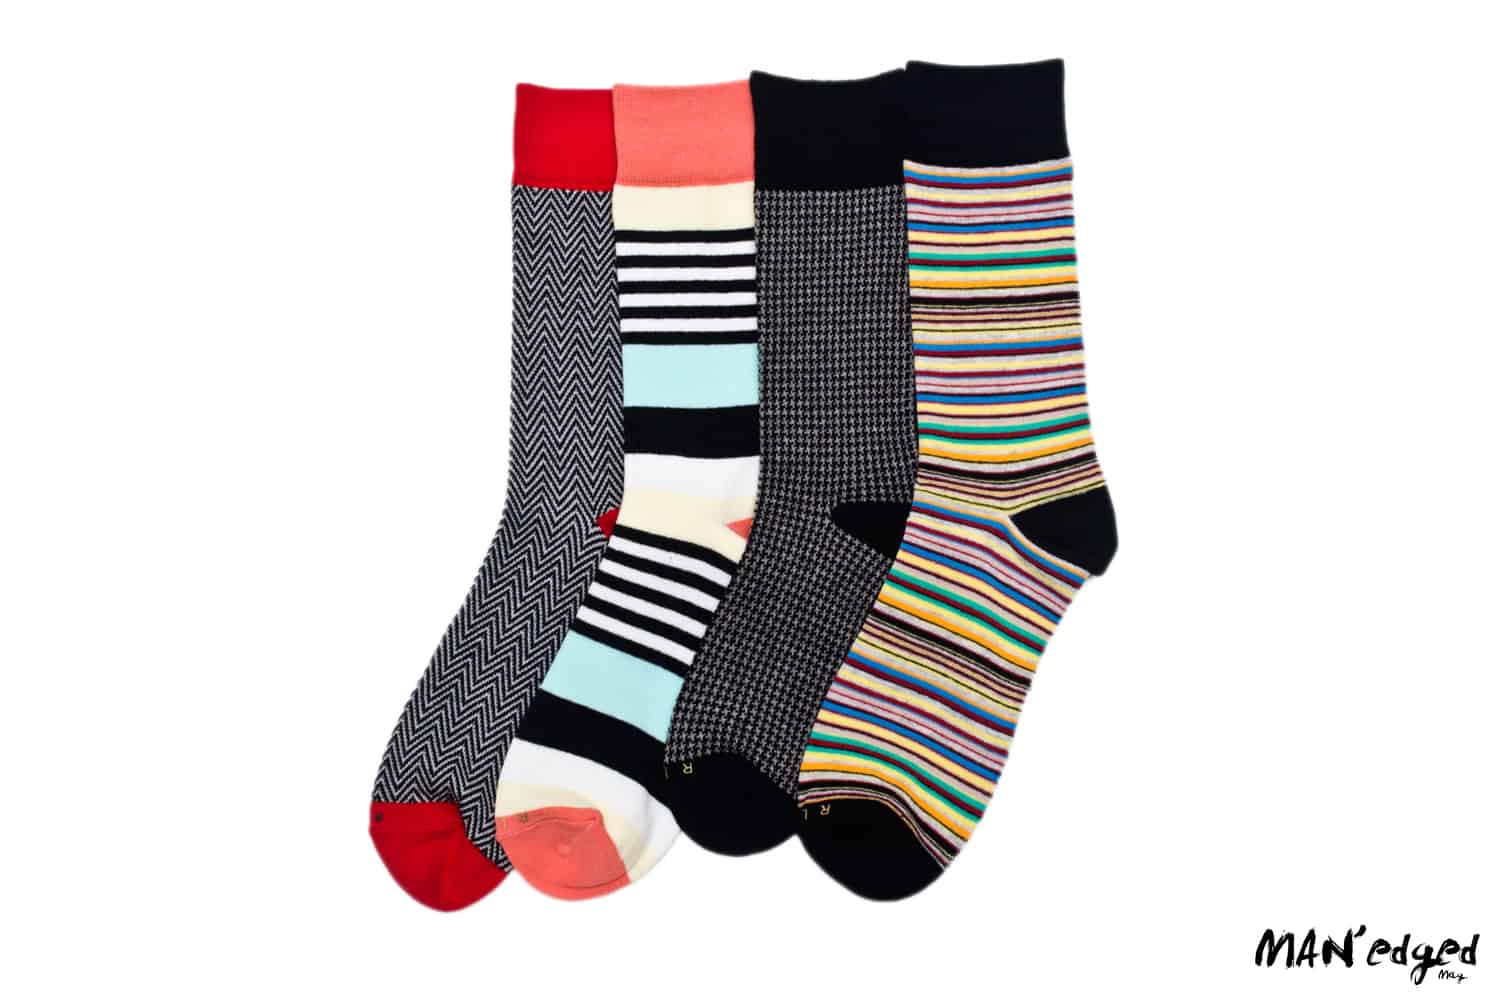 large image of related garment socks, featuring bold men's sock designs and colors